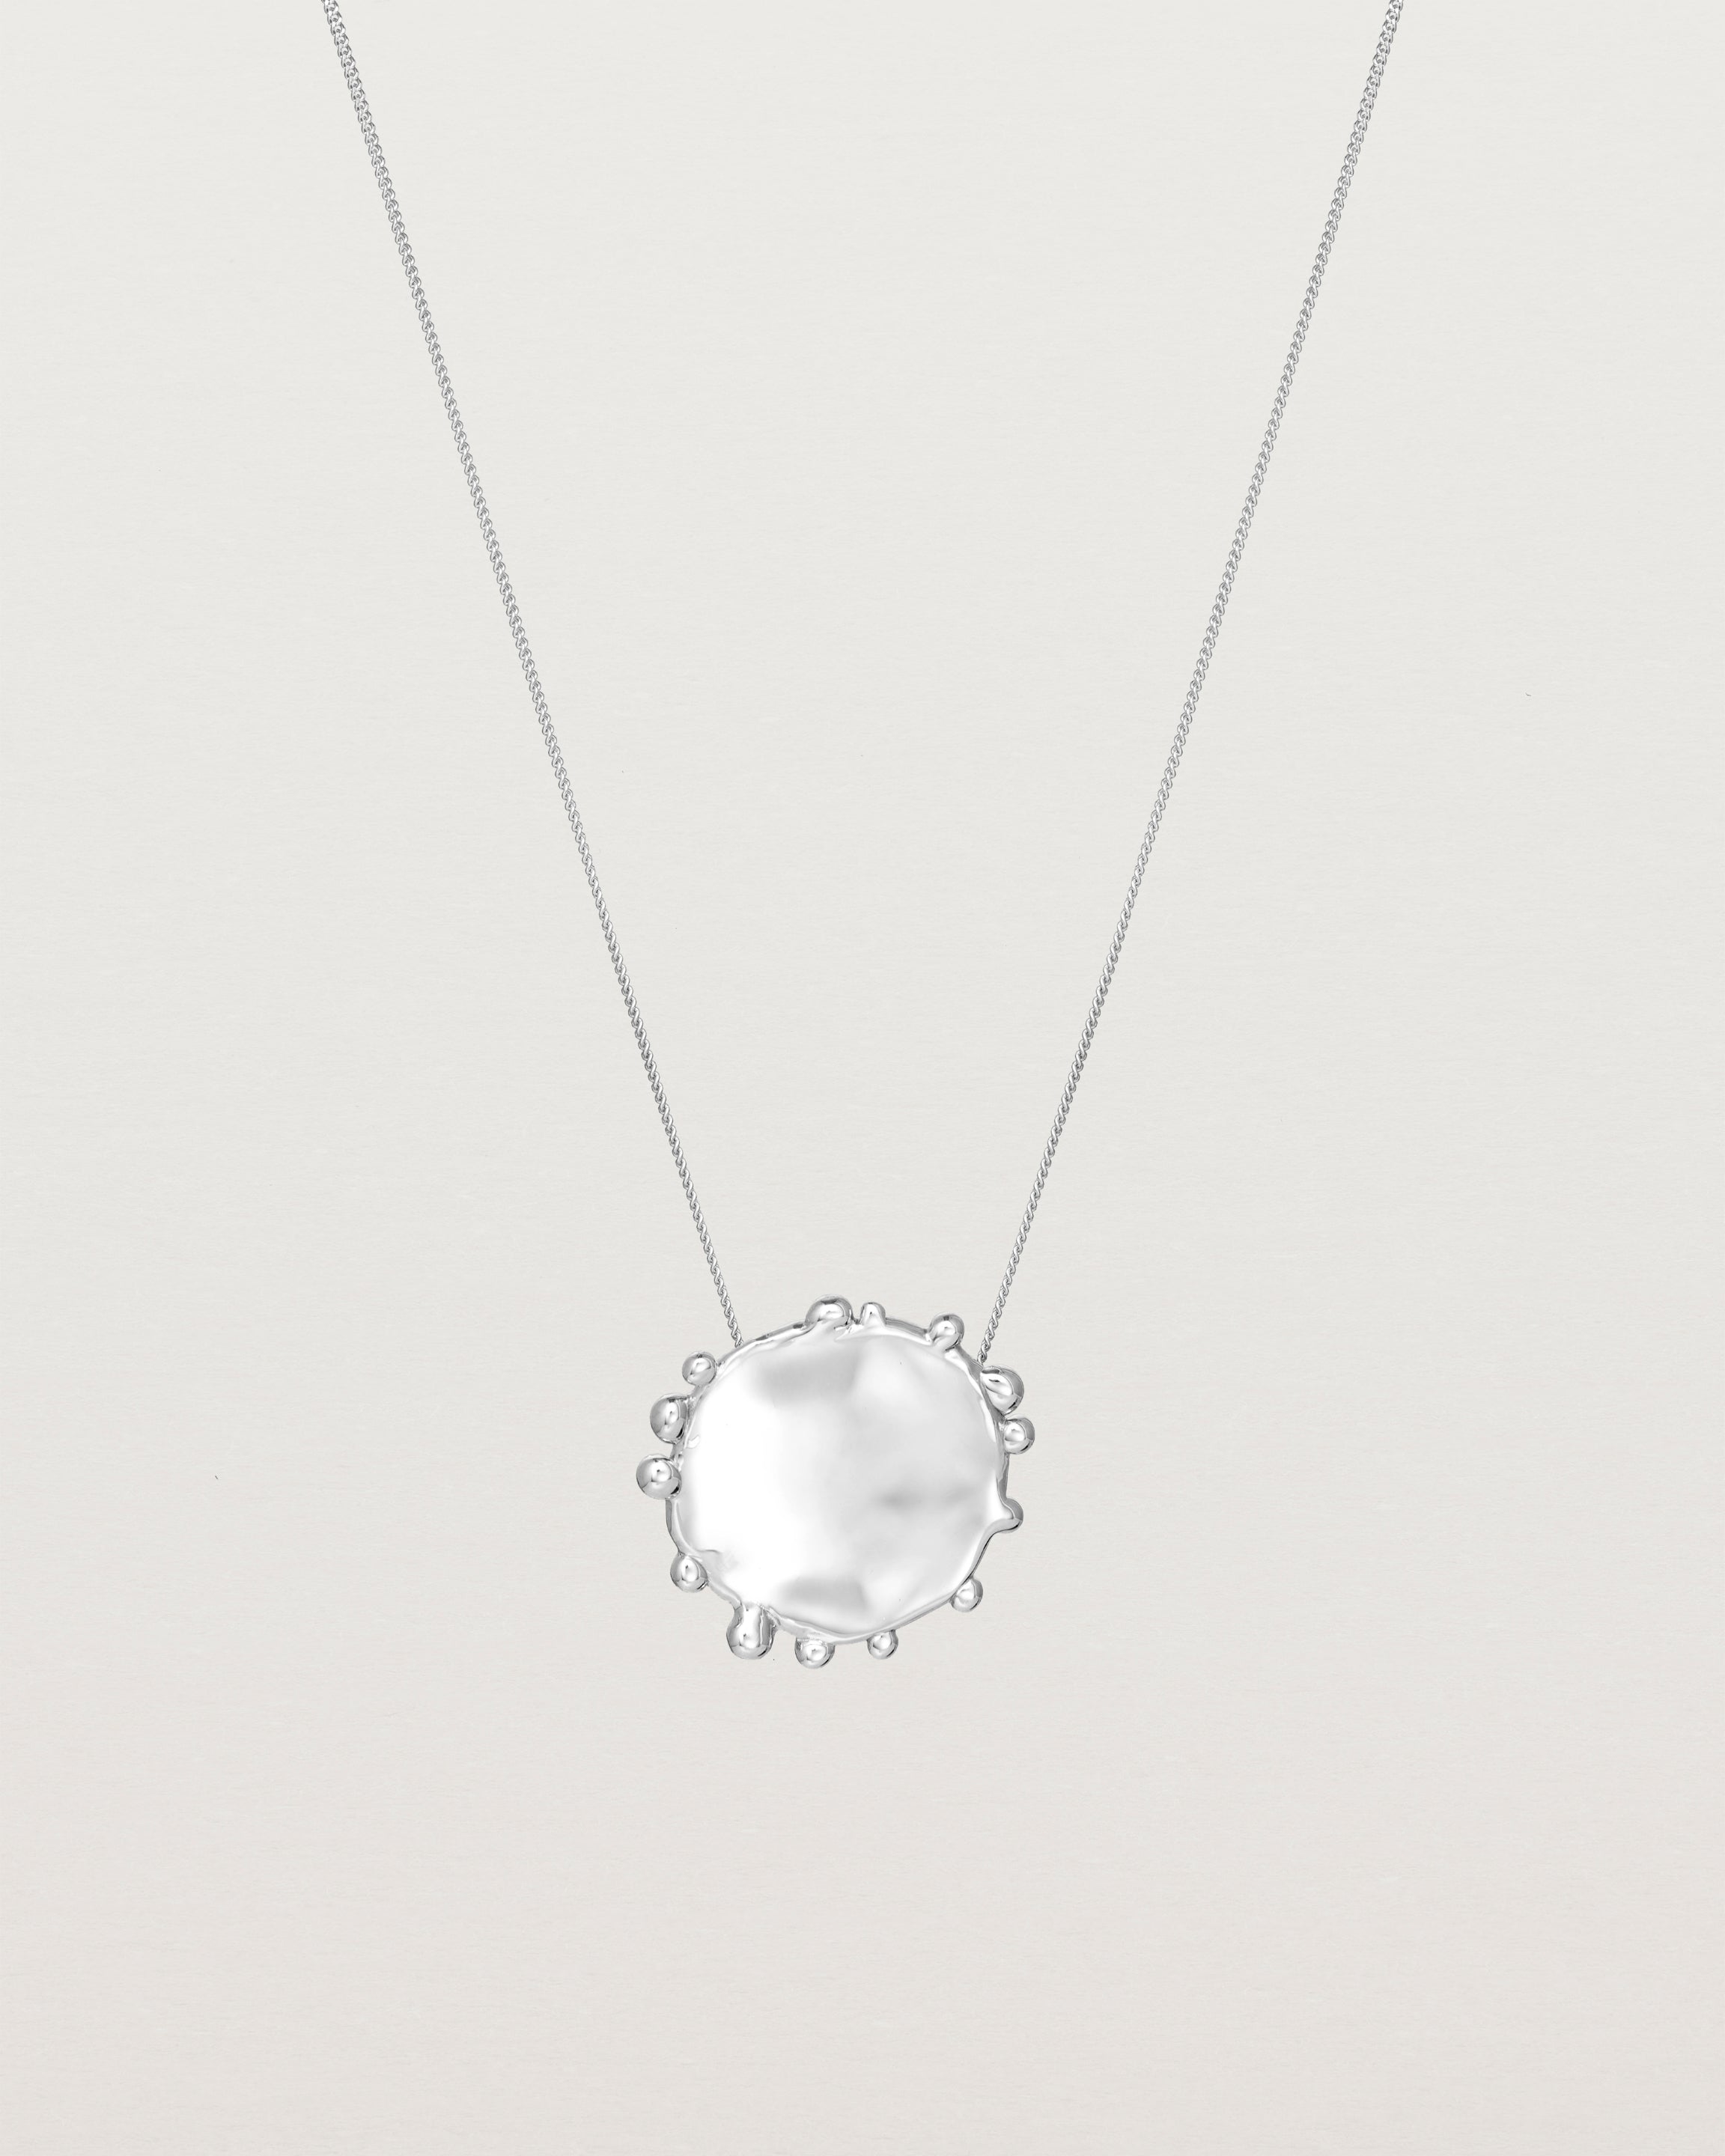 A molten textured silver disc with dots around the circumstance on a silver fine chain necklace